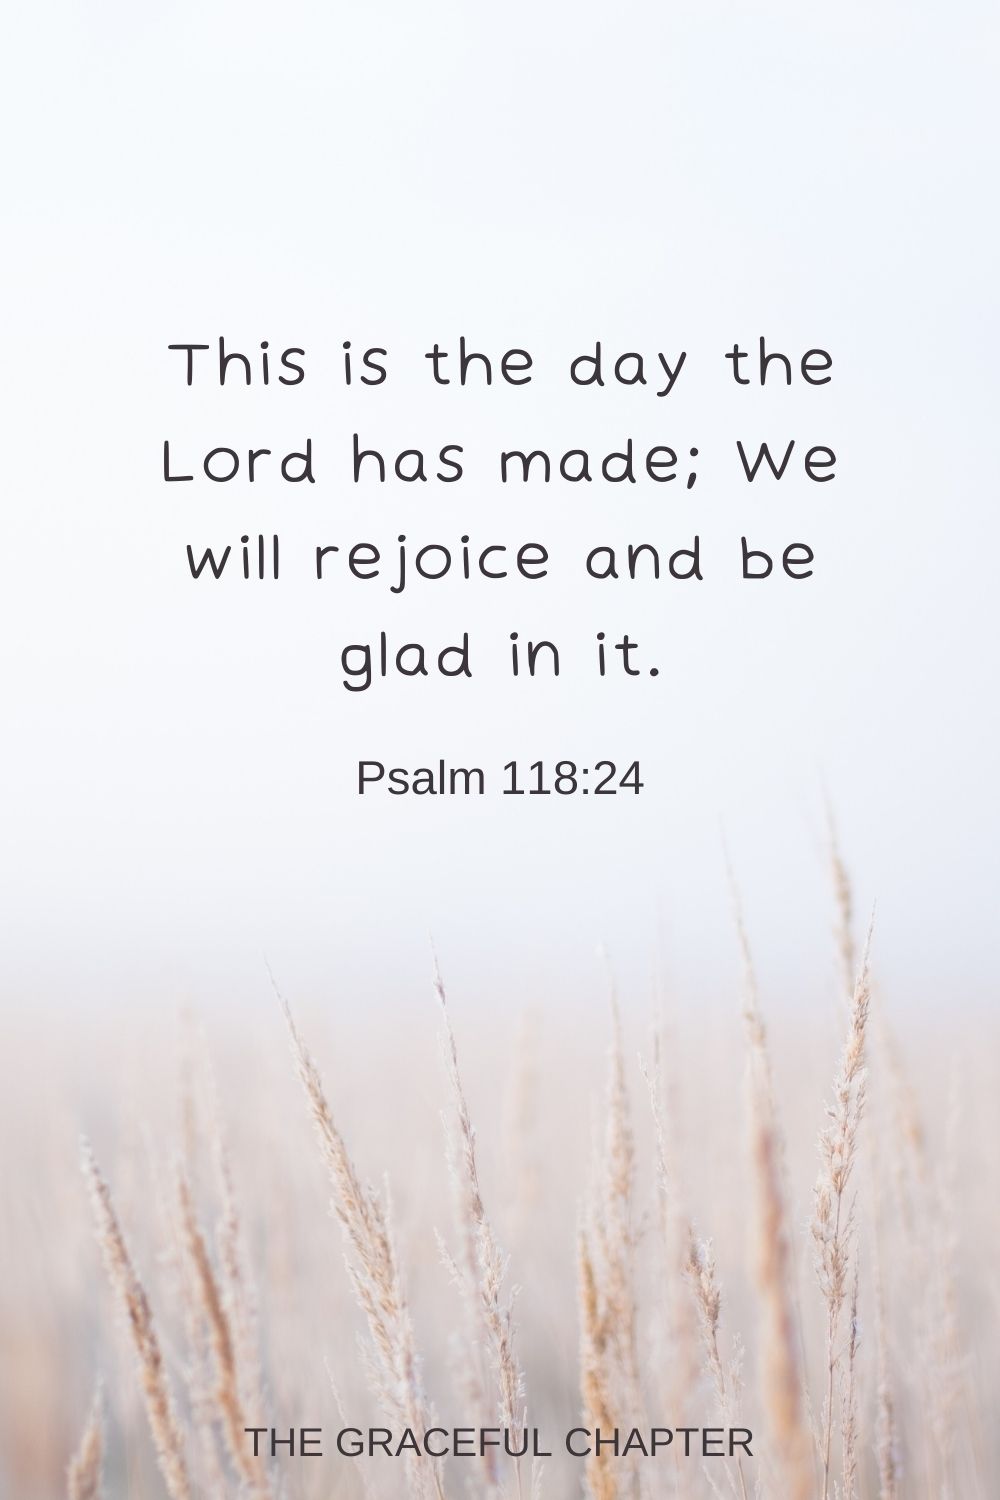 This is the day the Lord has made; We will rejoice and be glad in it. Psalm 118:24